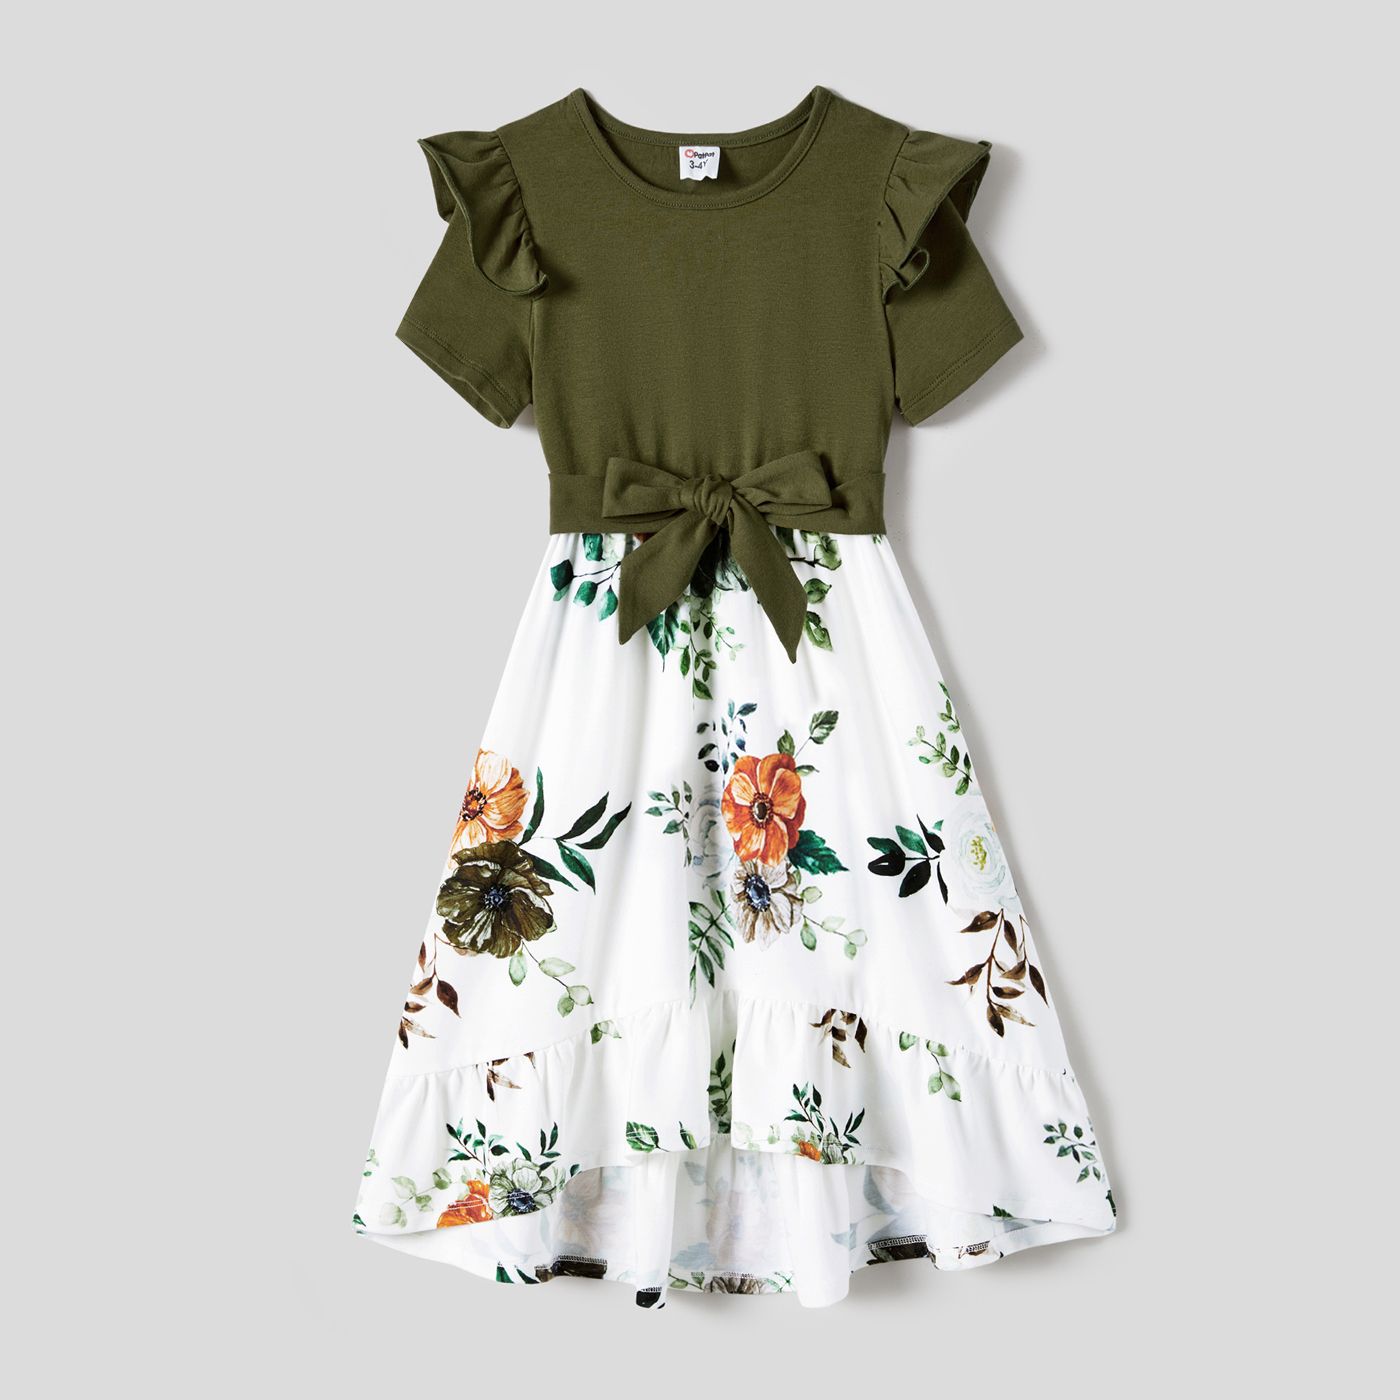 Family Matching Floral Print Tunic Hi-Low Hem Dresses And Color Block Short Sleeve Tops Sets